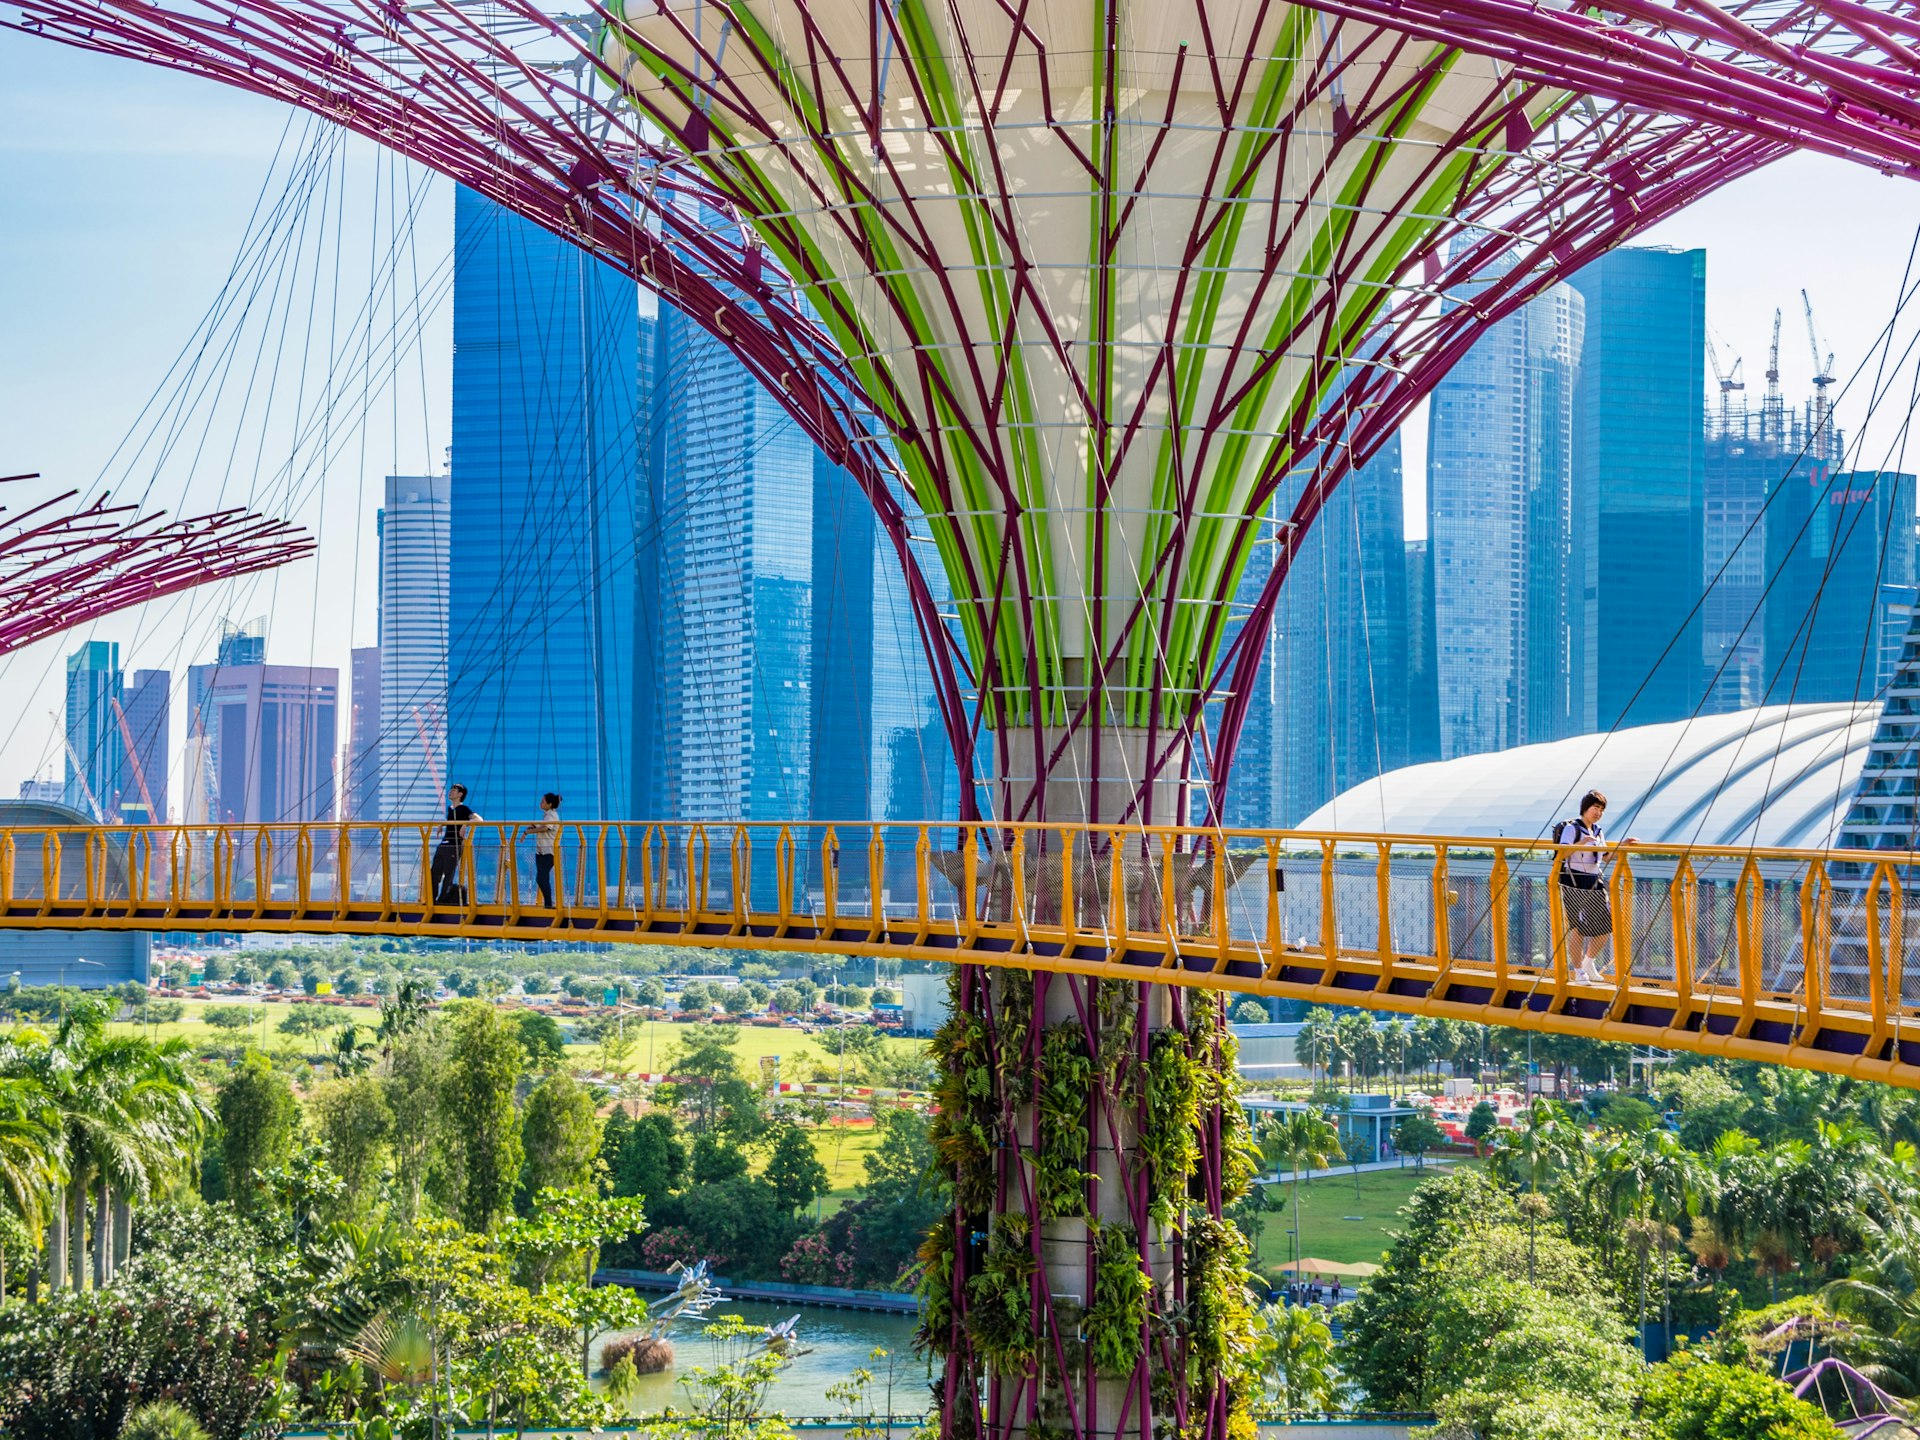 Visitors on the Canopy walkway of the Gardens by the Bay in Singapore